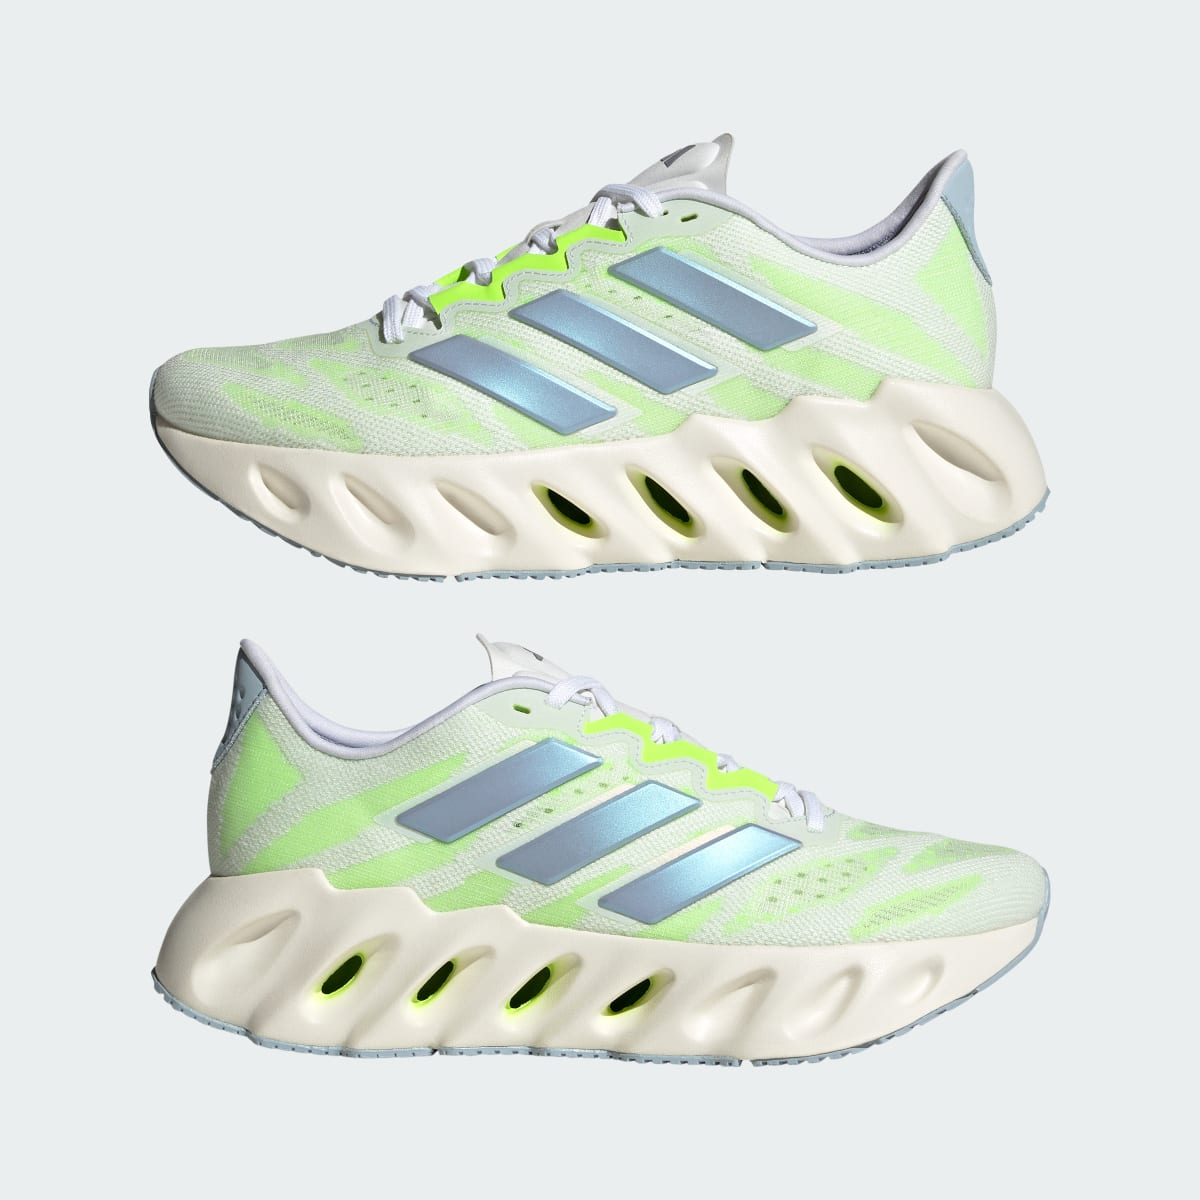 Adidas Switch FWD Running Shoes. 8